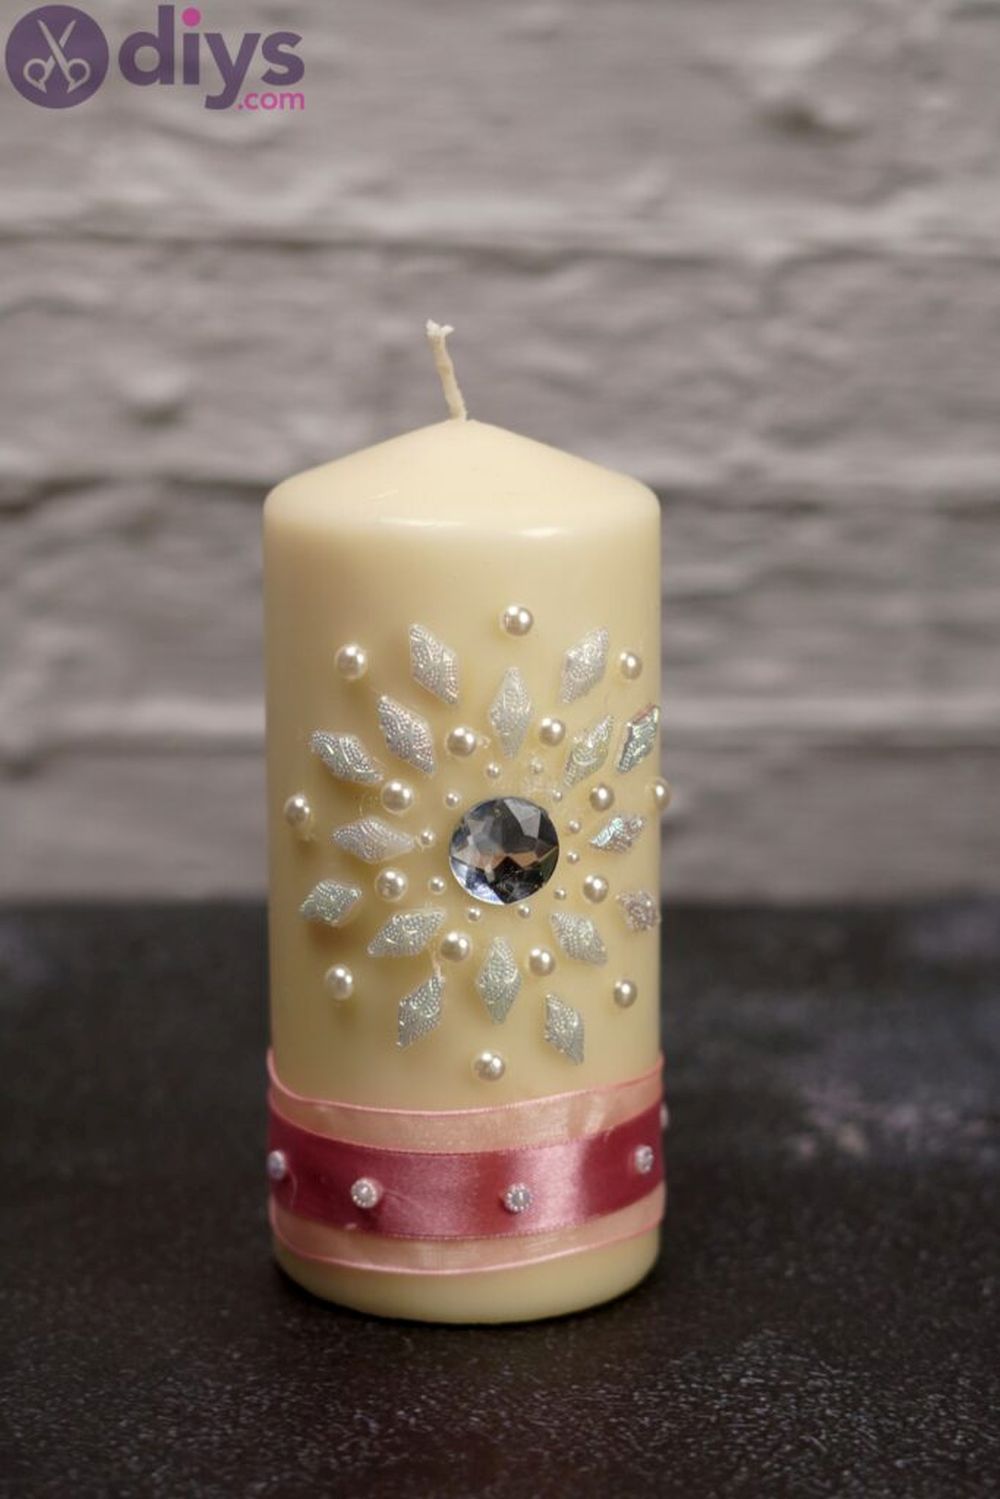 Candle art easy valentine’s day crafts 